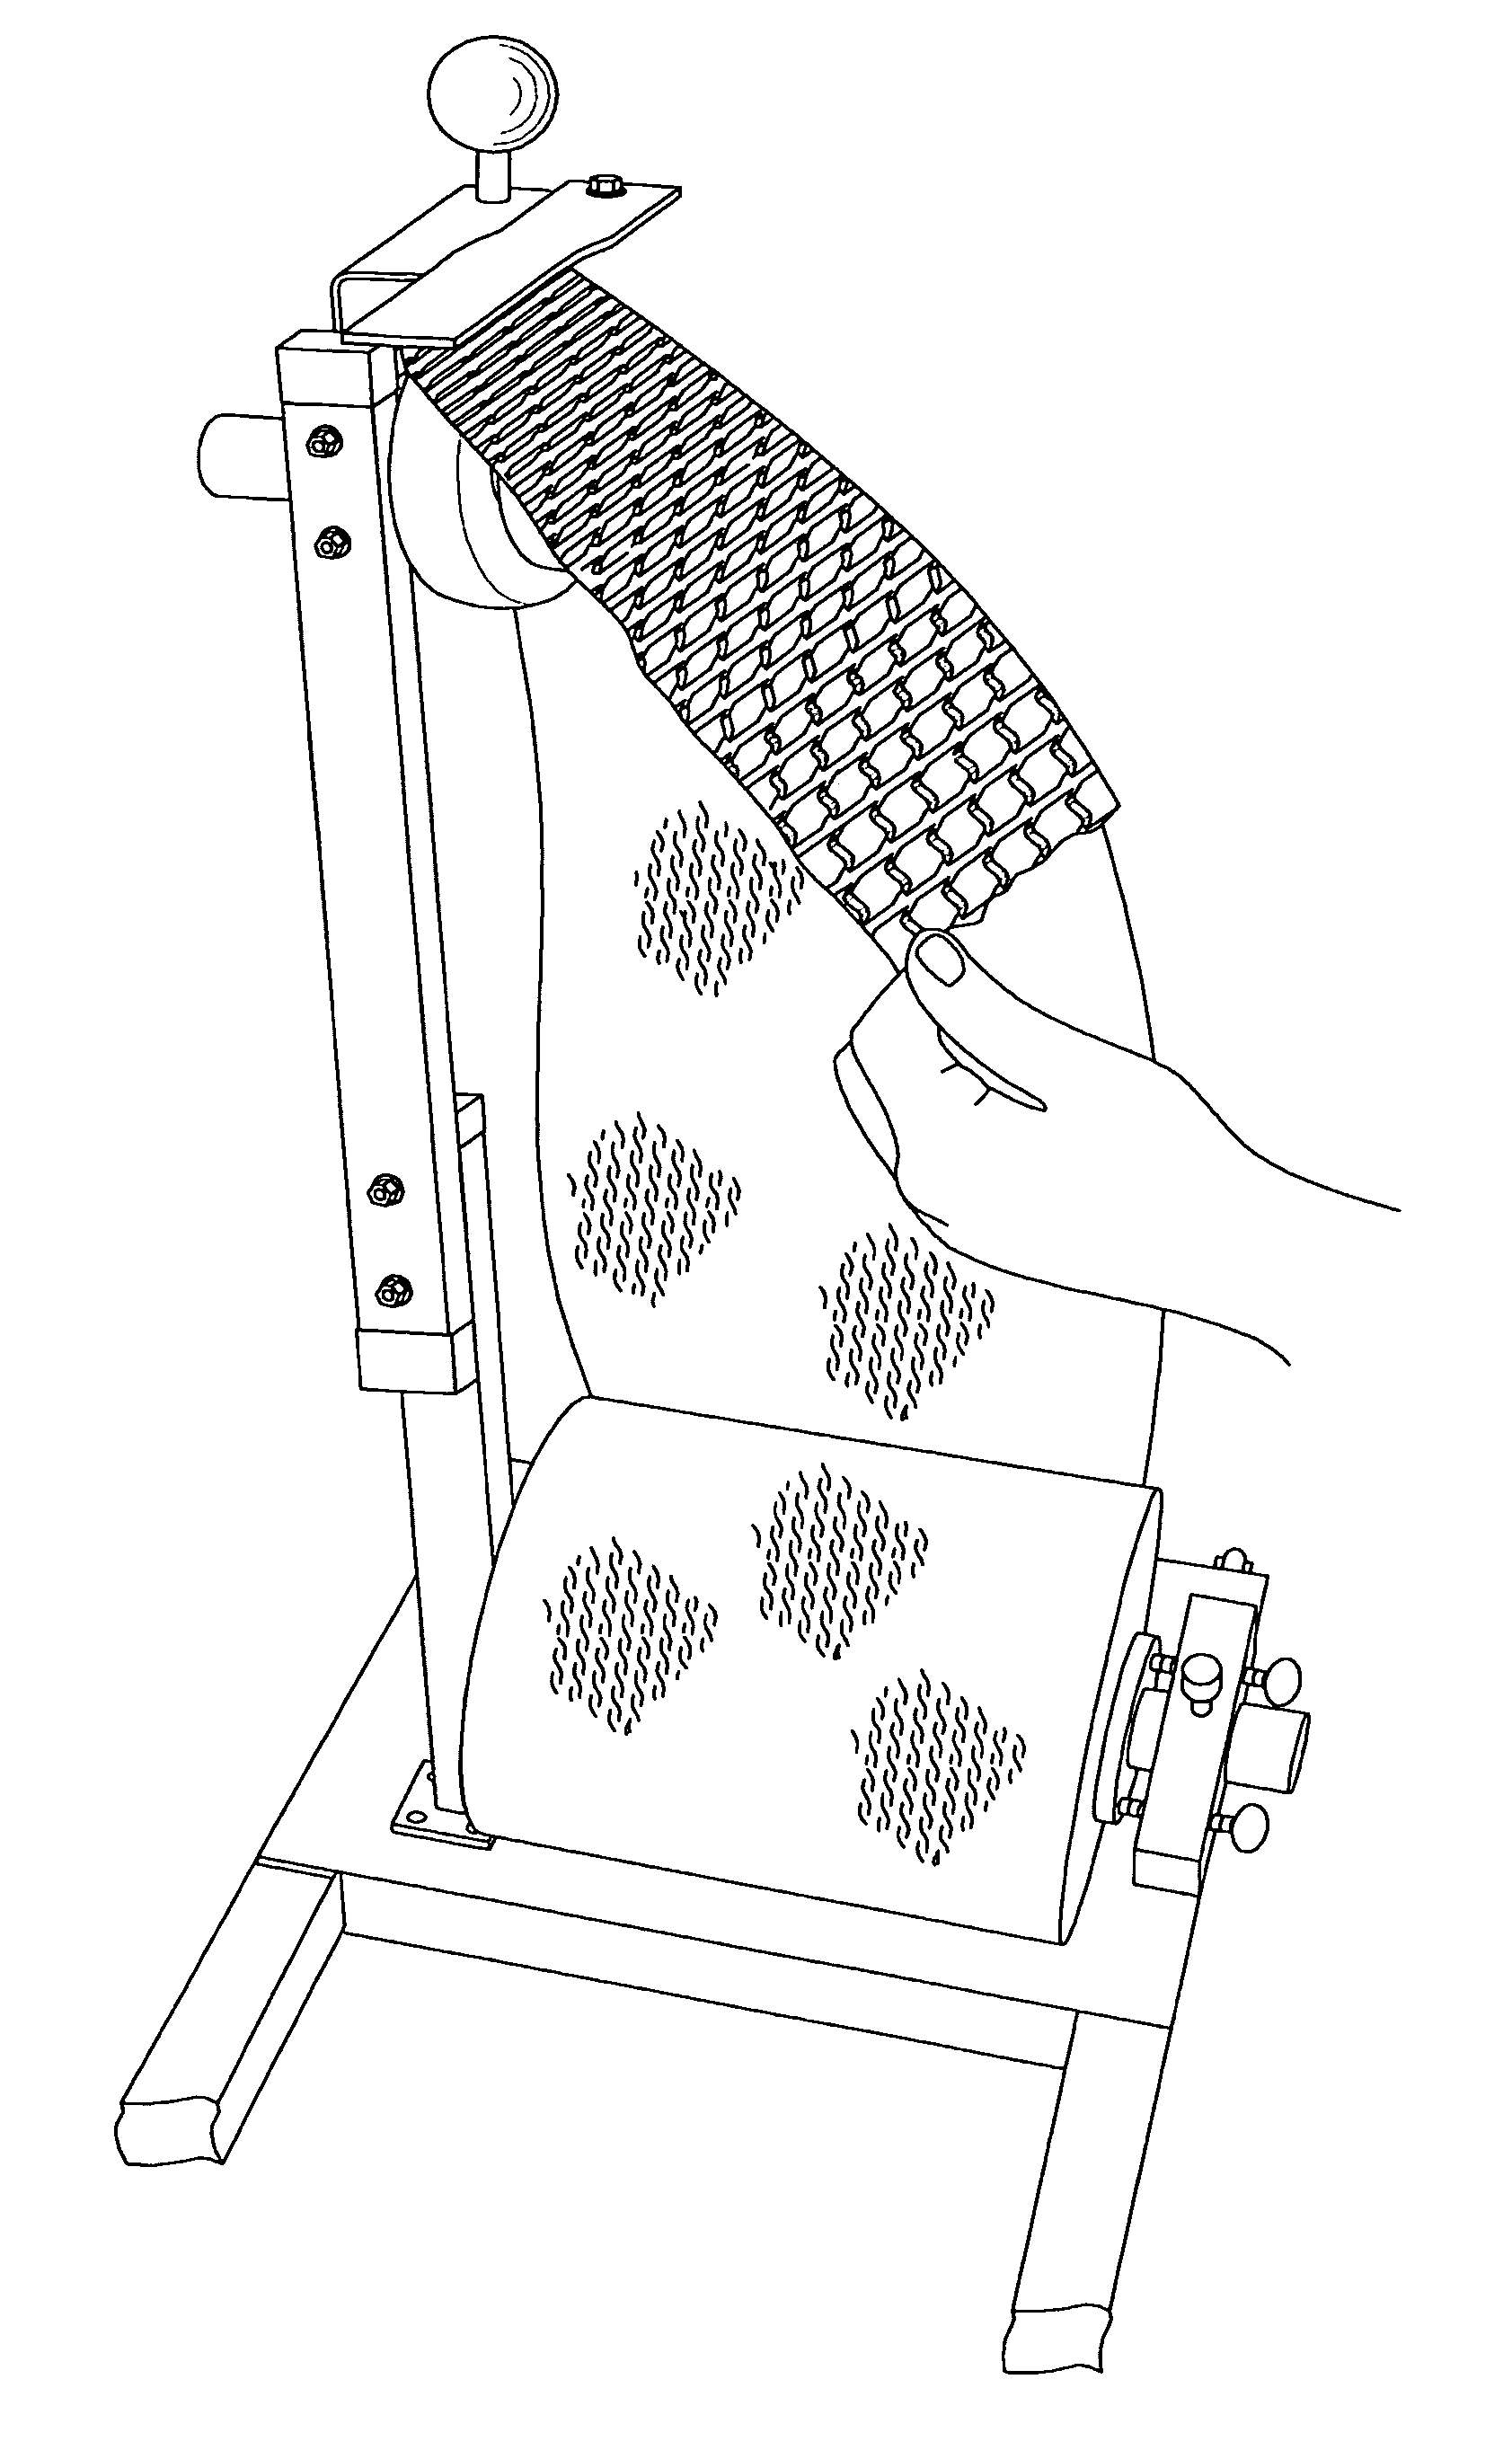 Apparatus to deploy and expand web material